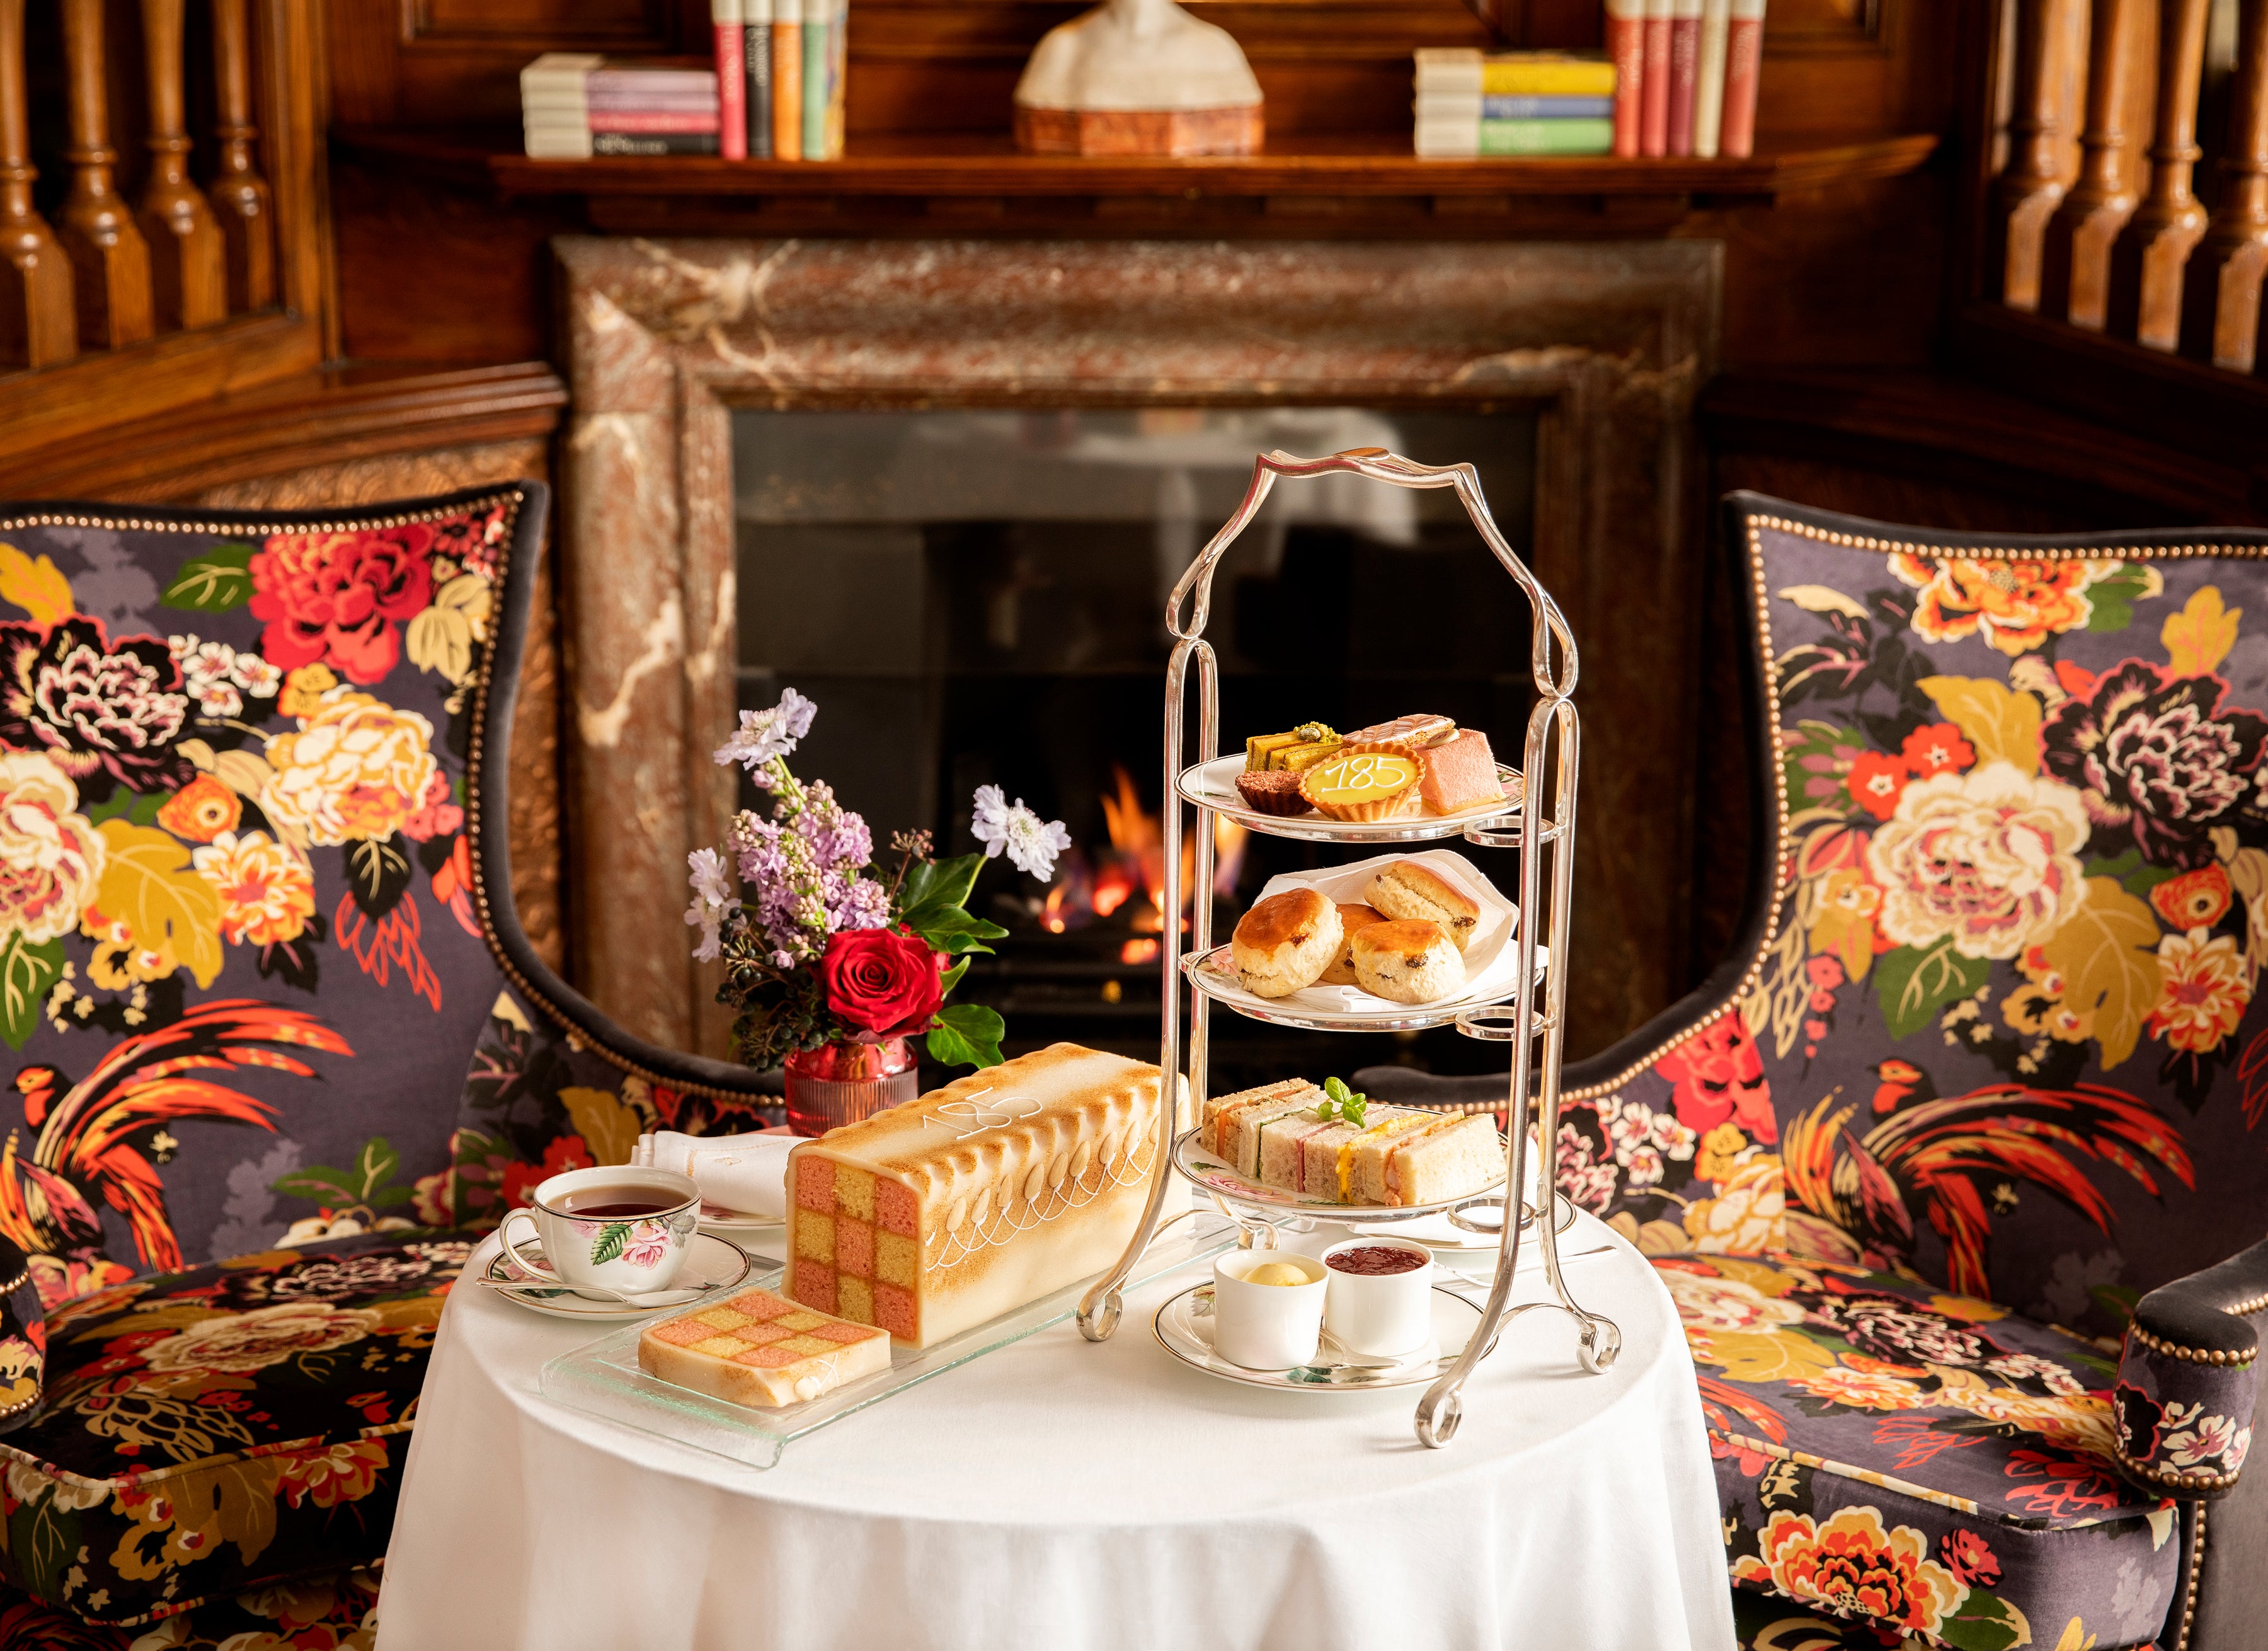 Brown’s has been excelling at afternoon tea since 1837